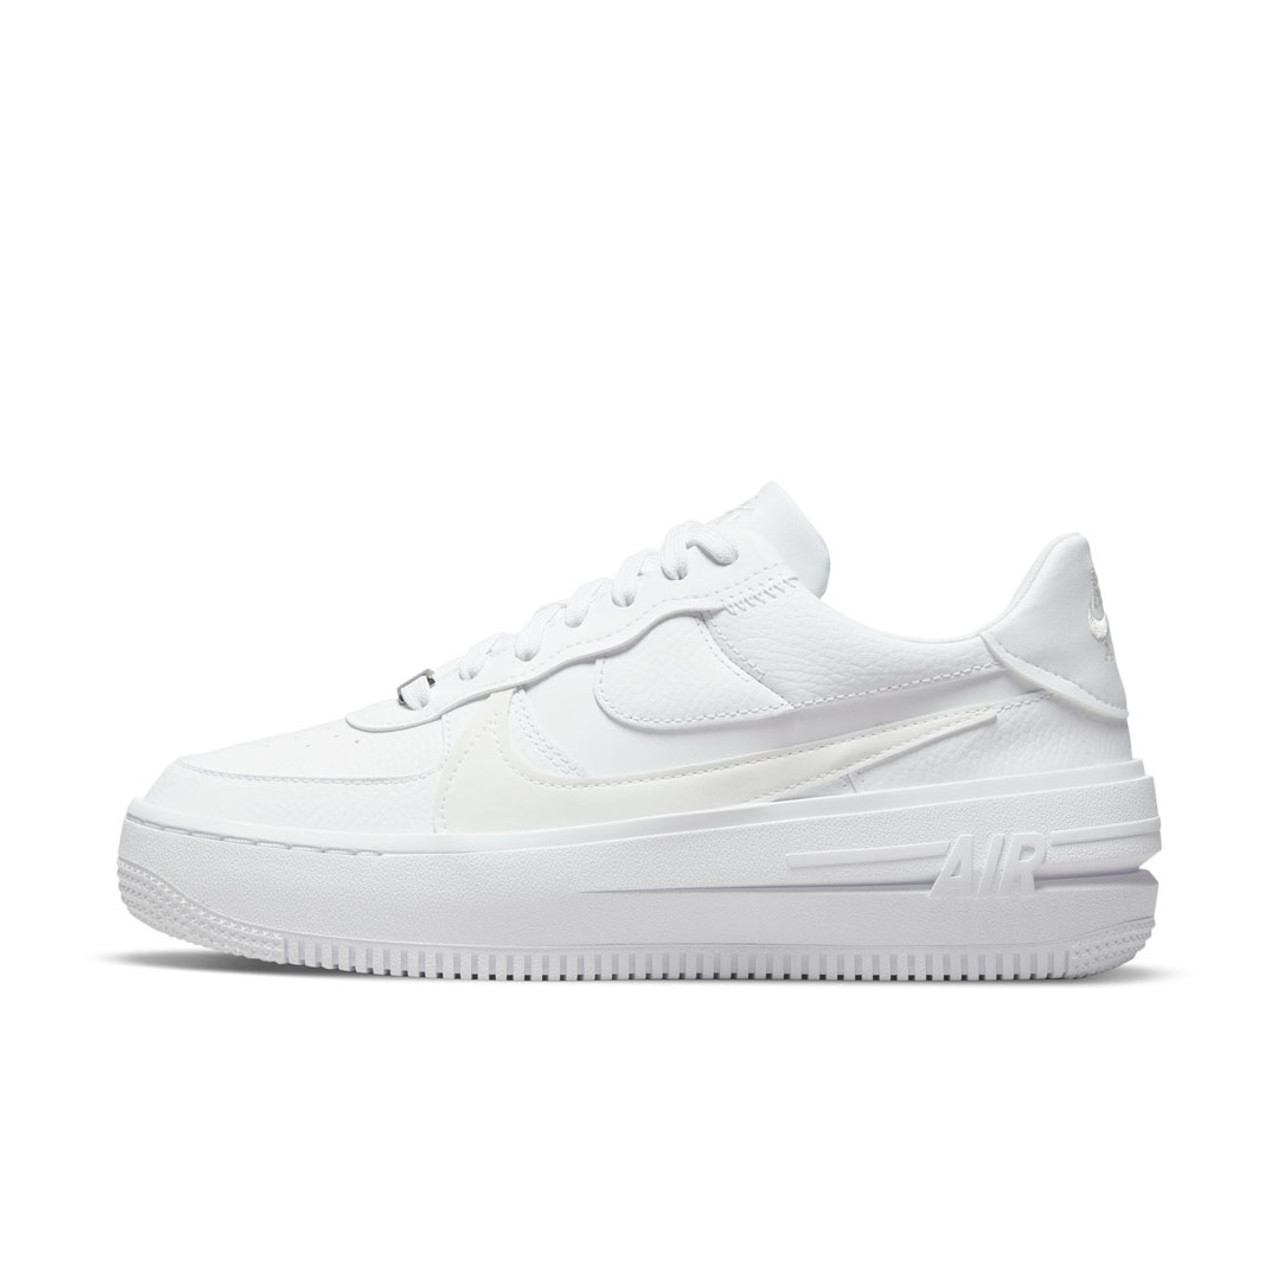 Nike Women's Air Force 1 PLT.AF.ORM Shoes - White/ White $ 119.99 | TYLER'S